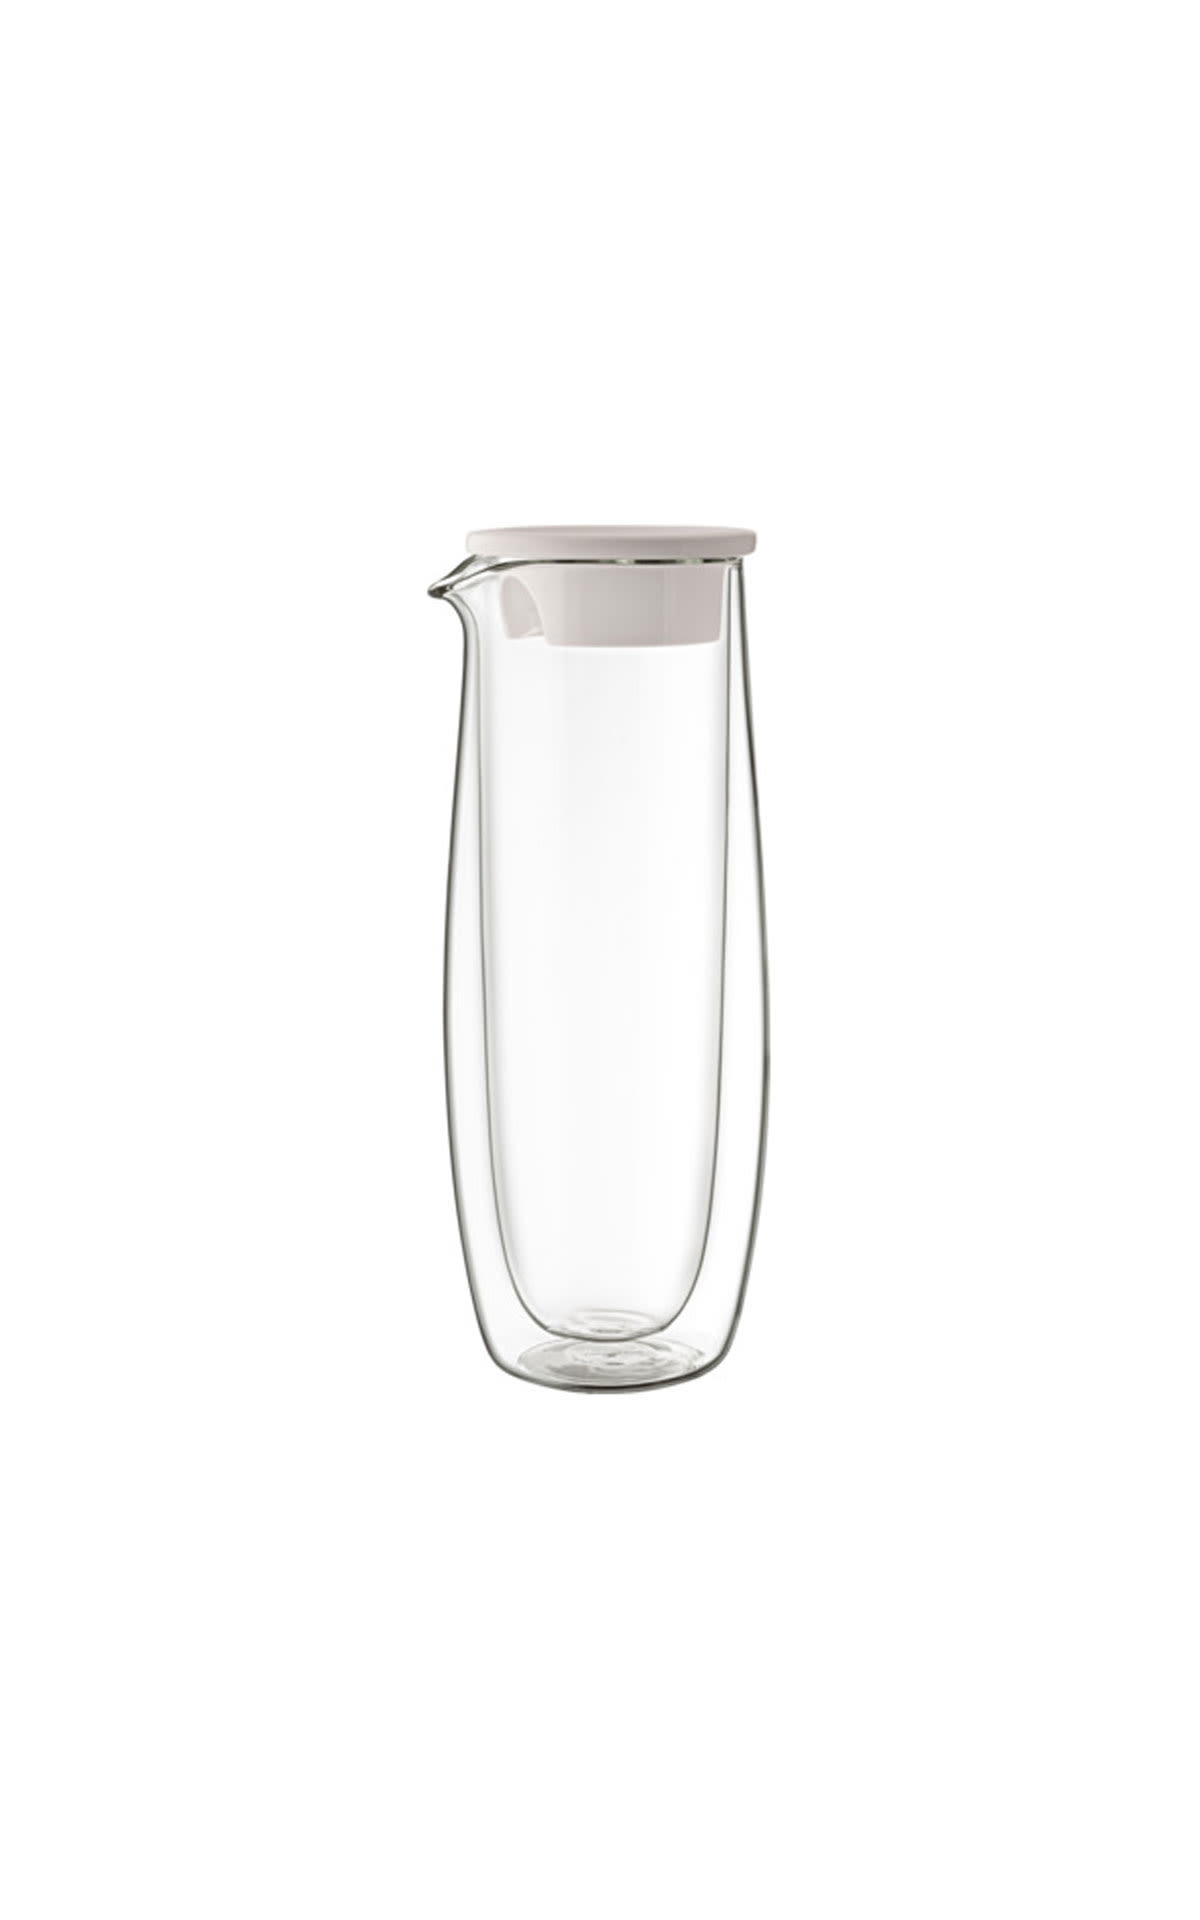 Villeroy & Boch Glass carafe with lid from Bicester Village